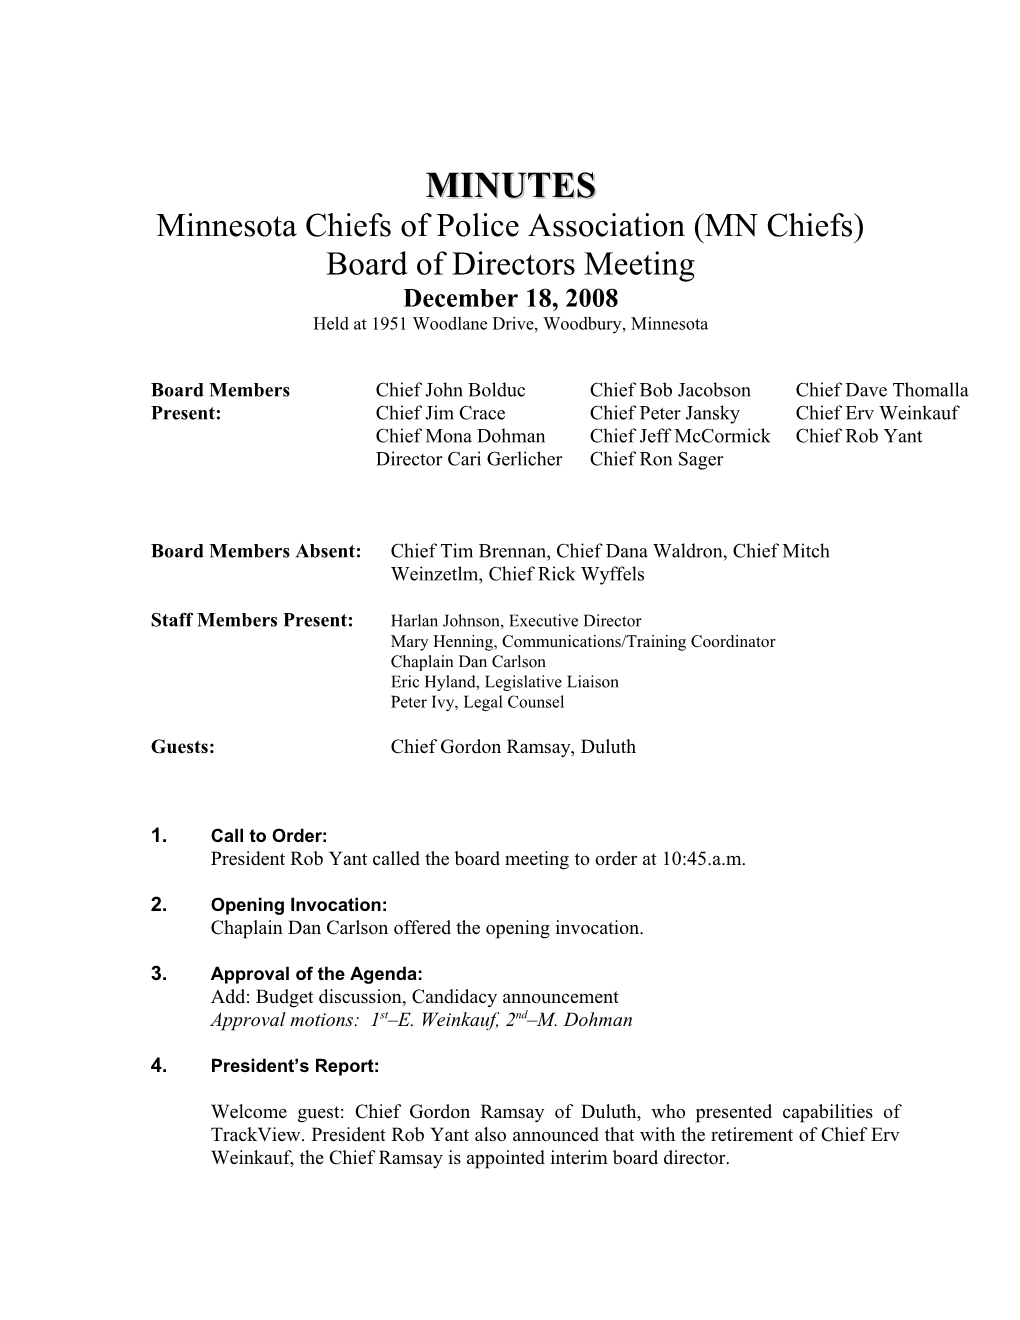 Minutes Minnesota Chiefs of Police Association Jan. 19, 2006 Board Meeting Page 1 of 7